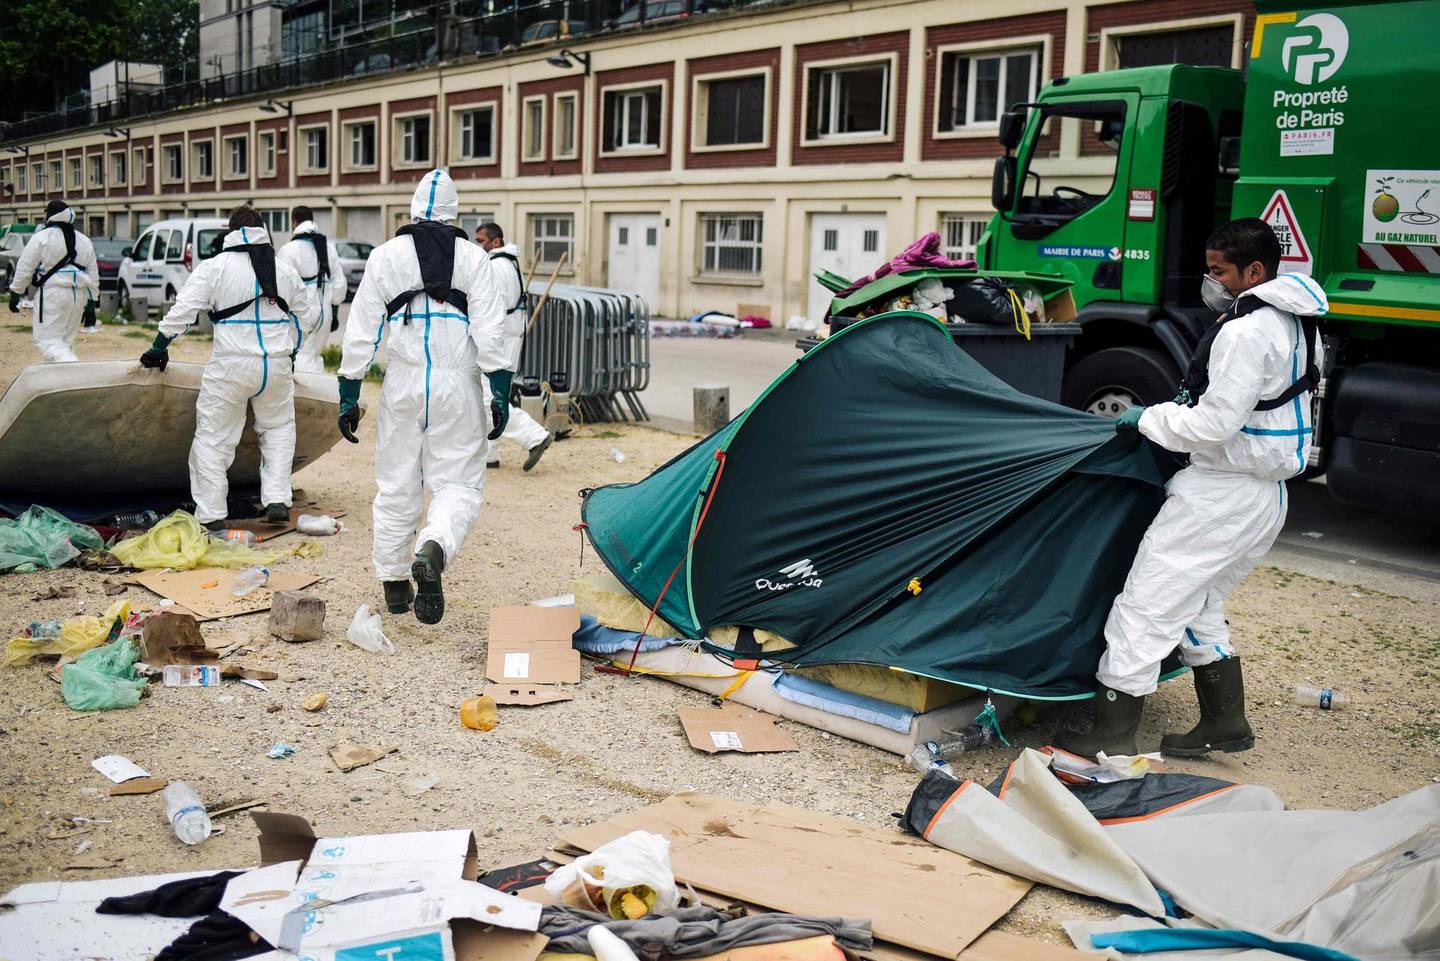 TOPSHOT - Workers clean up a migrants' makeshift camp along the Canal de Saint-Martin at Quai de Valmy in Paris, following its evacuation on June 4, 2018. More than 500 migrants and refugees were evacuated on early June 4, 2018 from a makeshift camp that had been set up for several weeks along the Canal. / AFP / Lucas Barioulet
